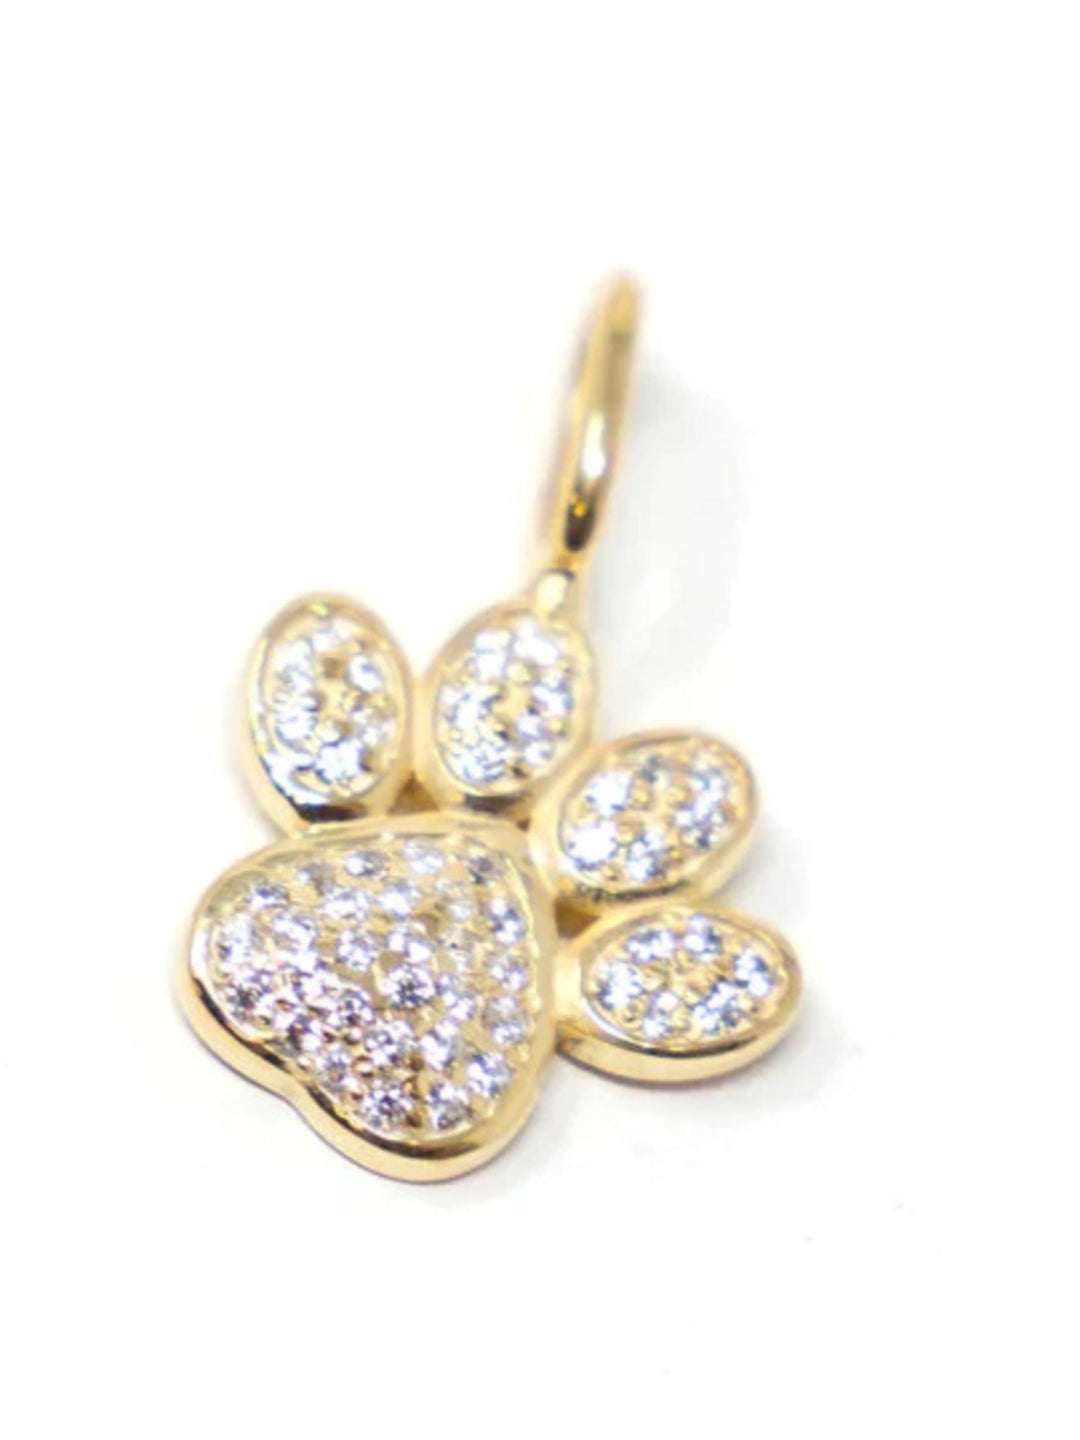 Charm Bar Assorted Charms, Gold-Paw Print